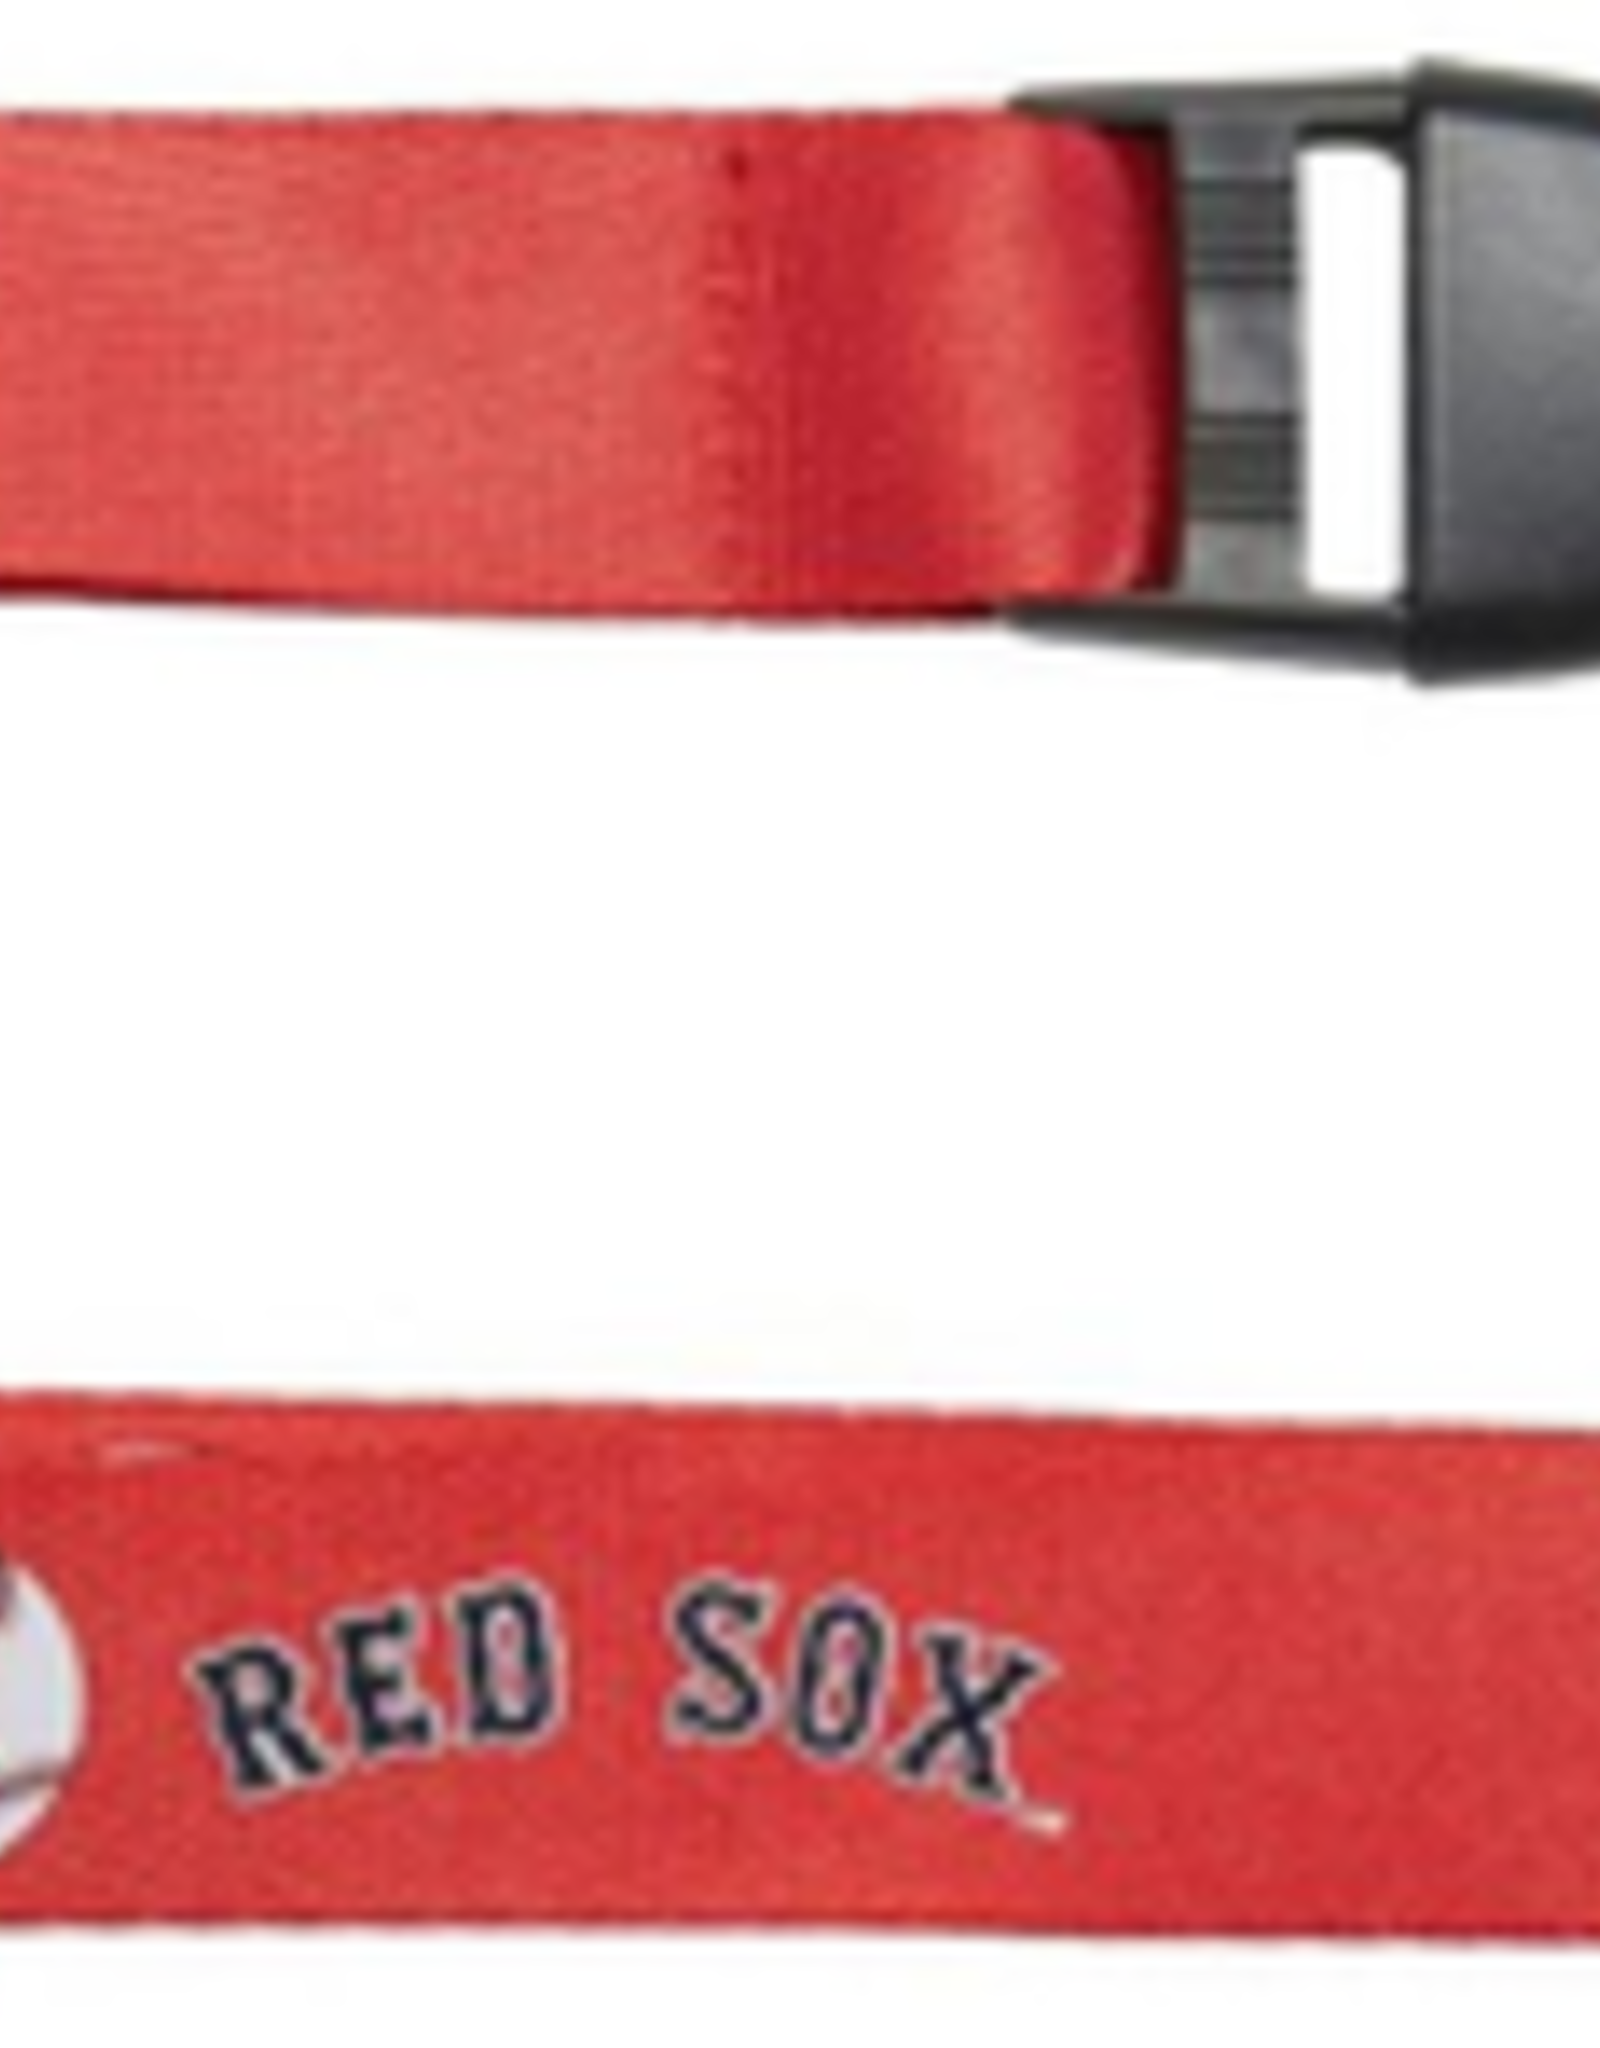 Aminco Boston Red Sox Team Lanyard / Red